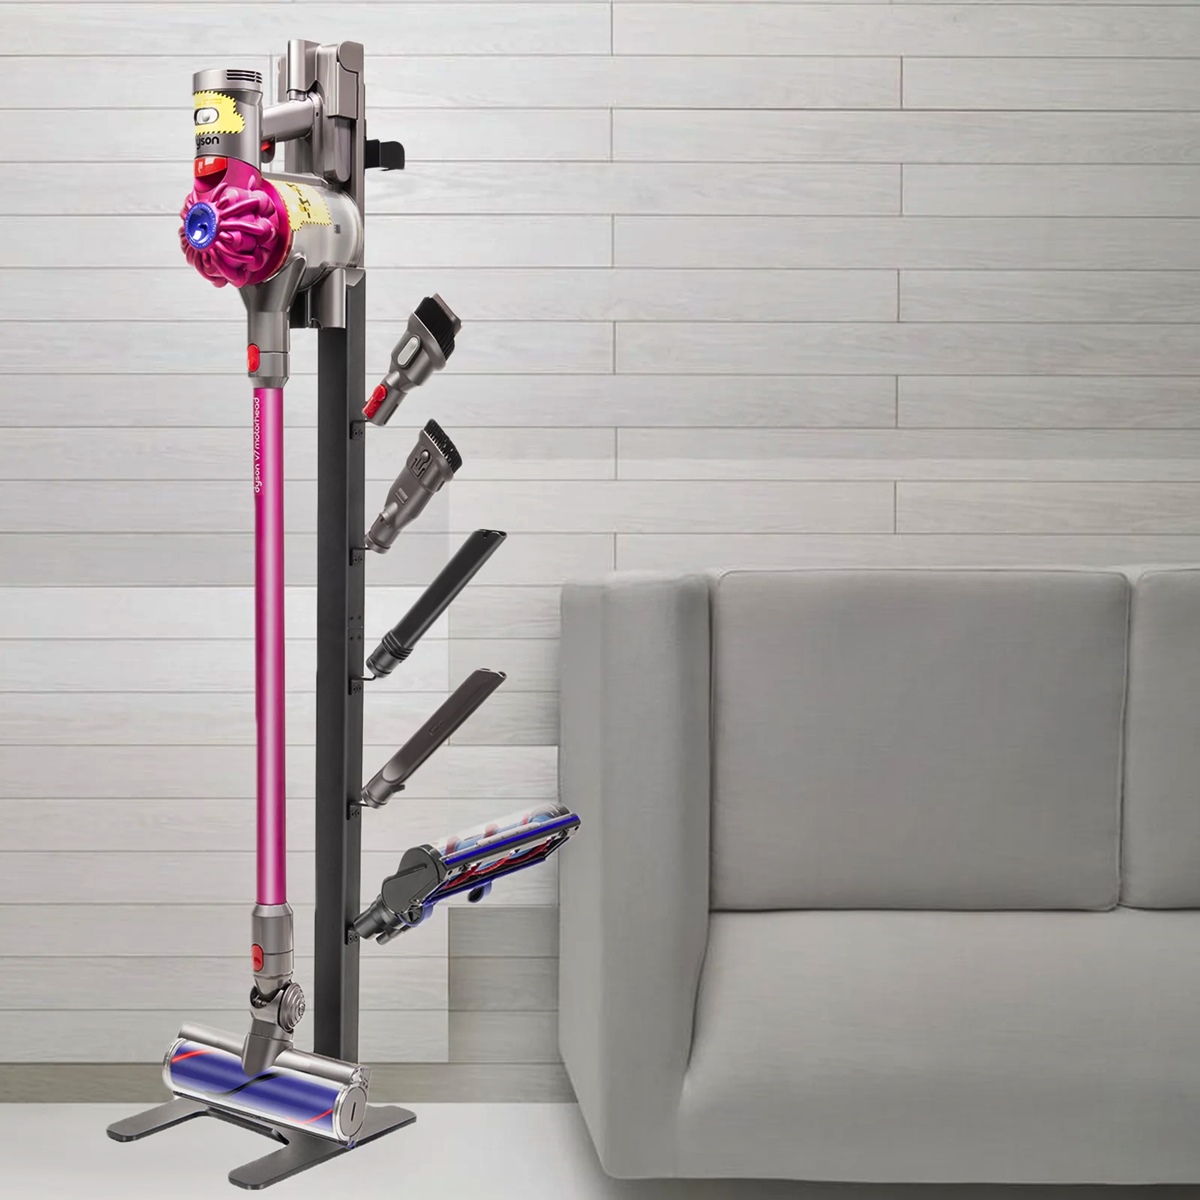 Understanding The Functionality Of Dyson Docking Station